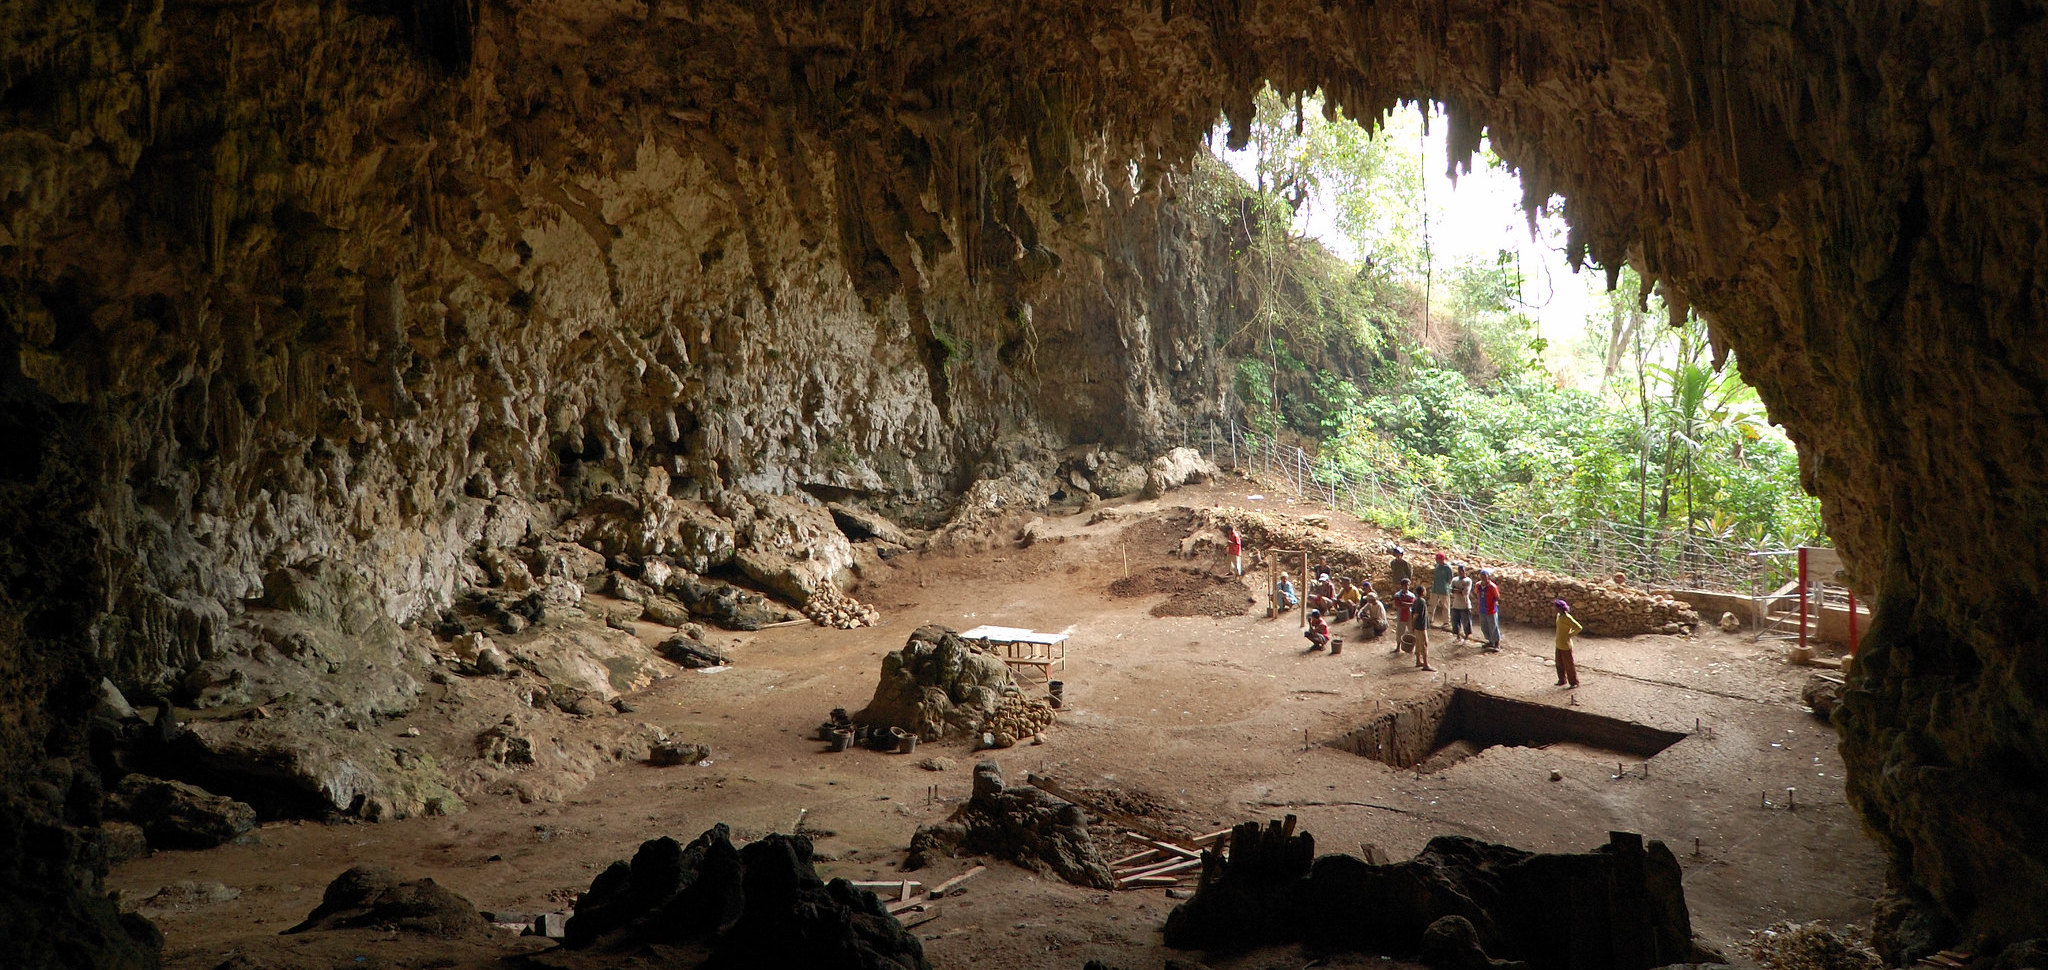 Cave where the remainings of *Homo floresiensis* where discovered in 2003, Liang Bua, Flores, Indonesia. Photo by [Rosino](https://www.flickr.com/photos/rosino/), [CC BY-SA 2.0](https://creativecommons.org/licenses/by-sa/2.0/).